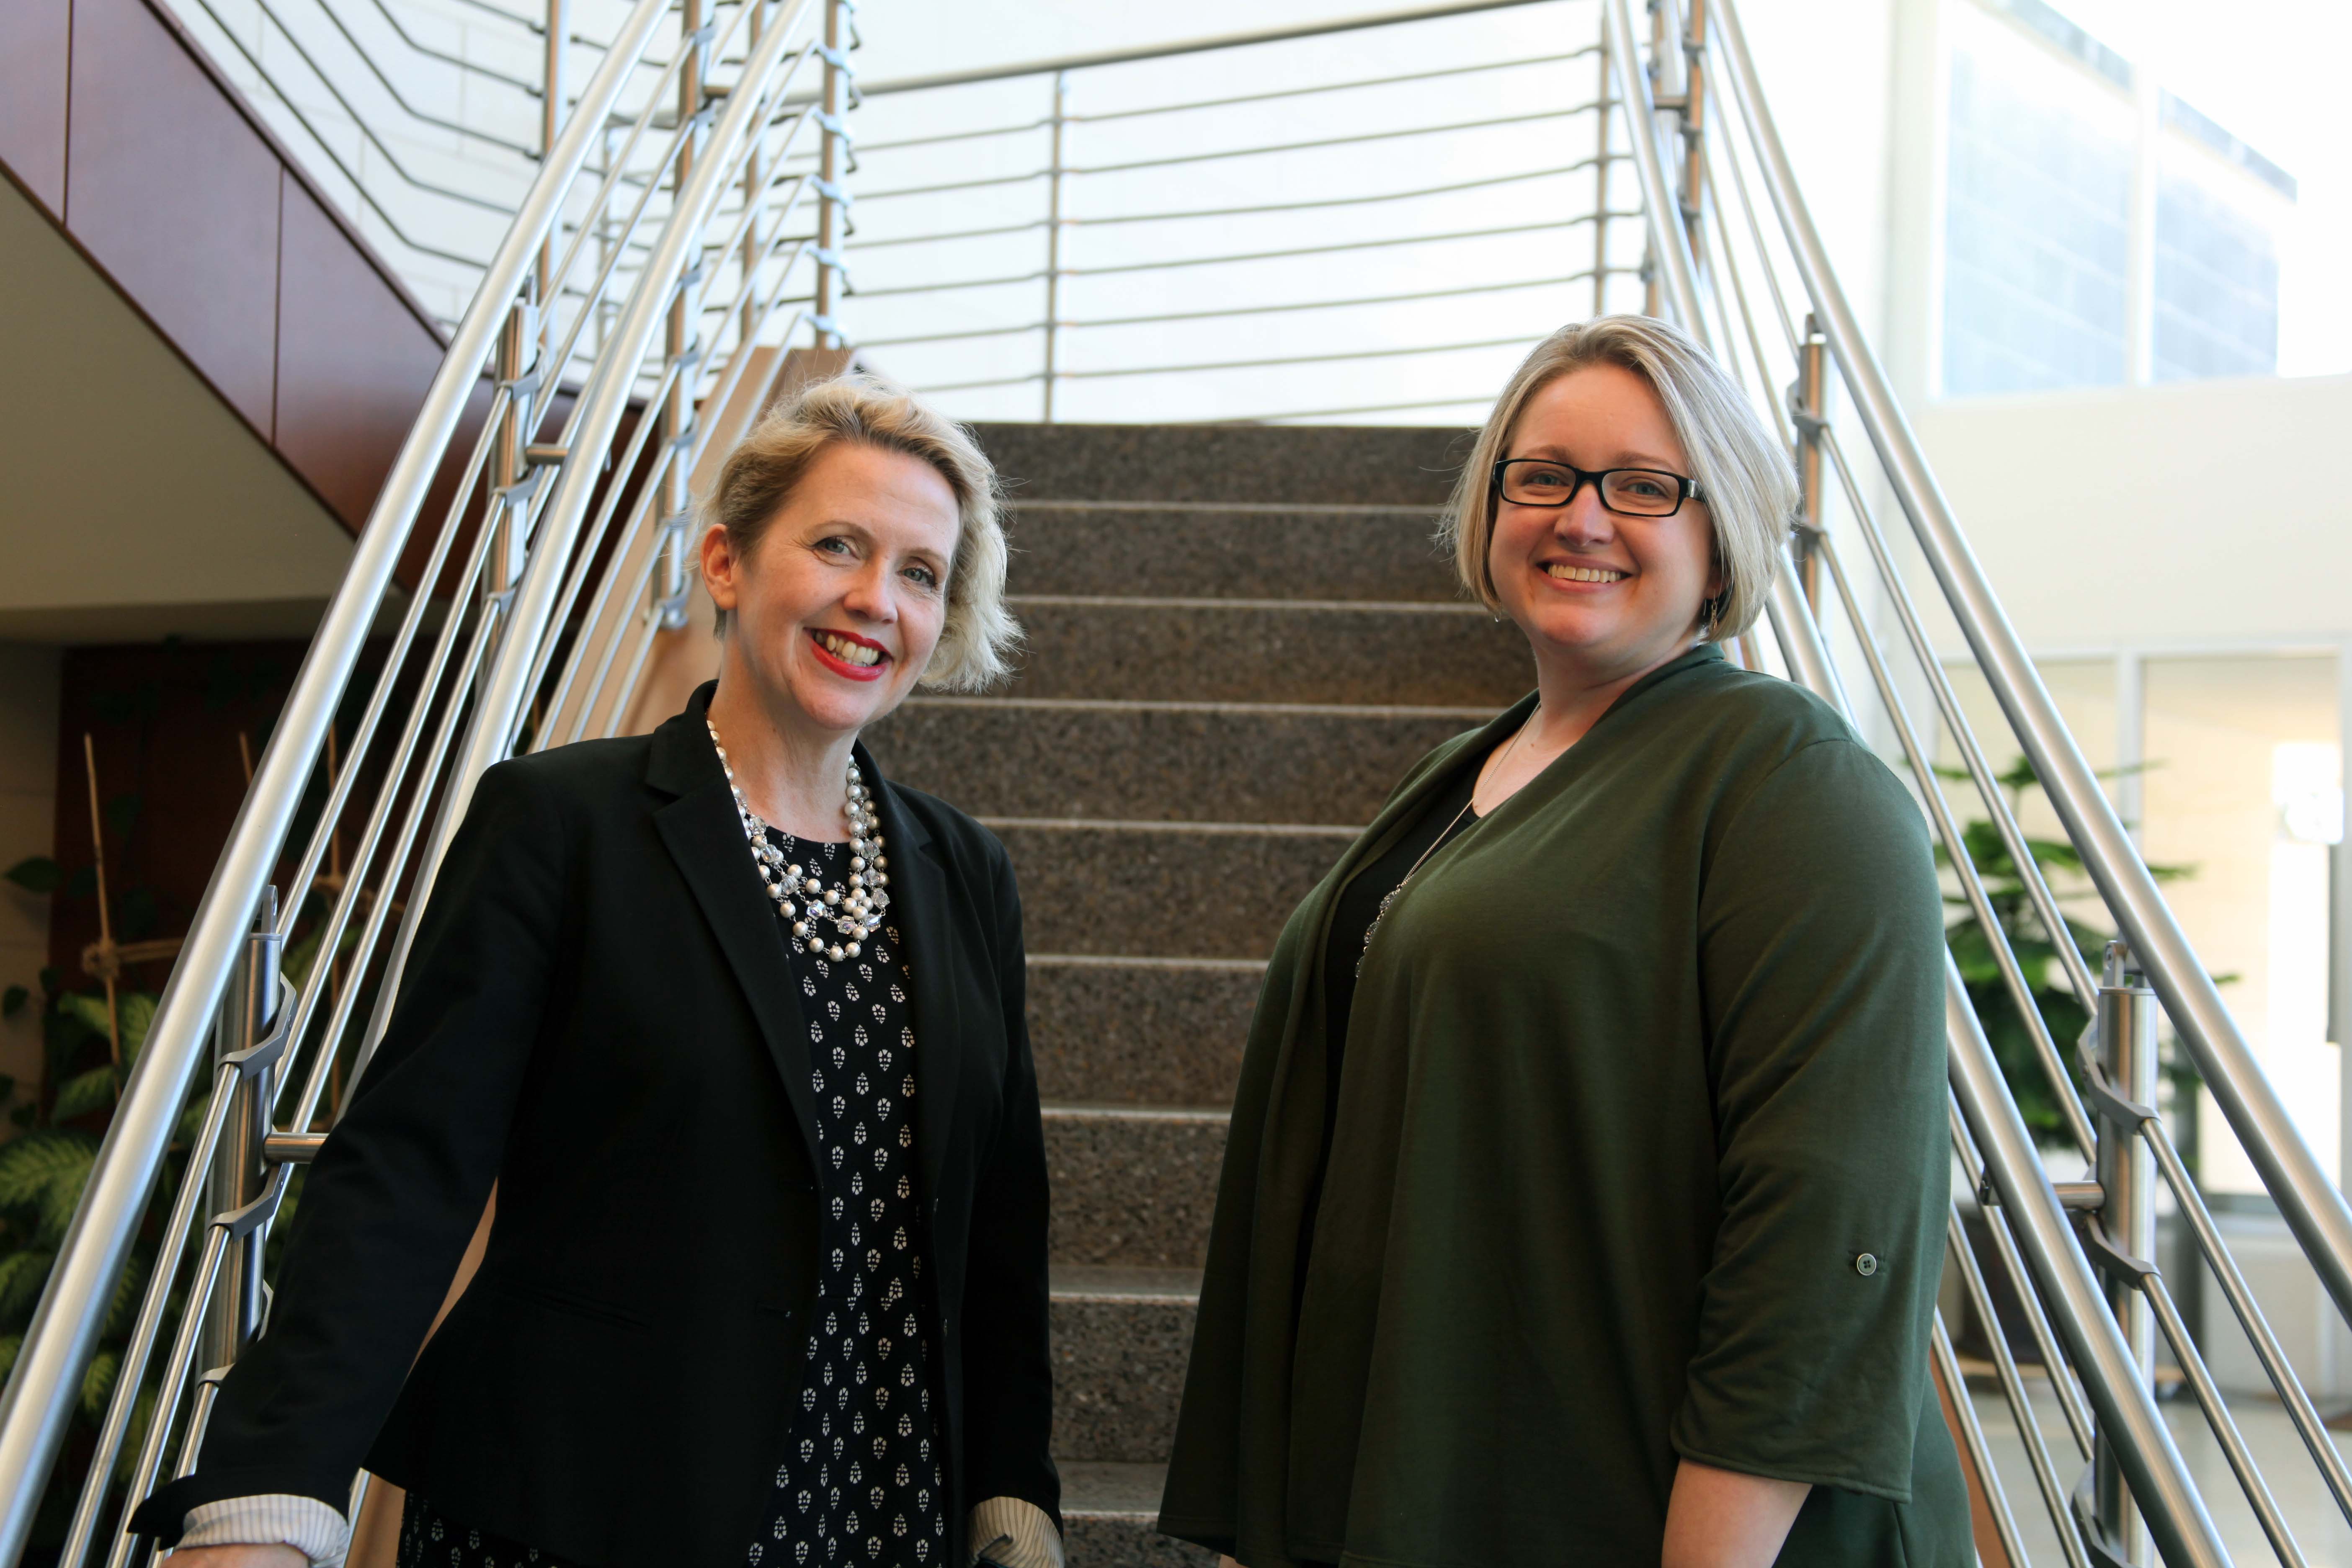 As a new year gets underway at GNTC two new administrators, Lauretta Hannon (left), director of Institutional Advancement, and Jennifer Loudermilk, associate vice president of Academic Affairs, have come aboard to oversee Academic Affairs at the college as well as its Foundation.